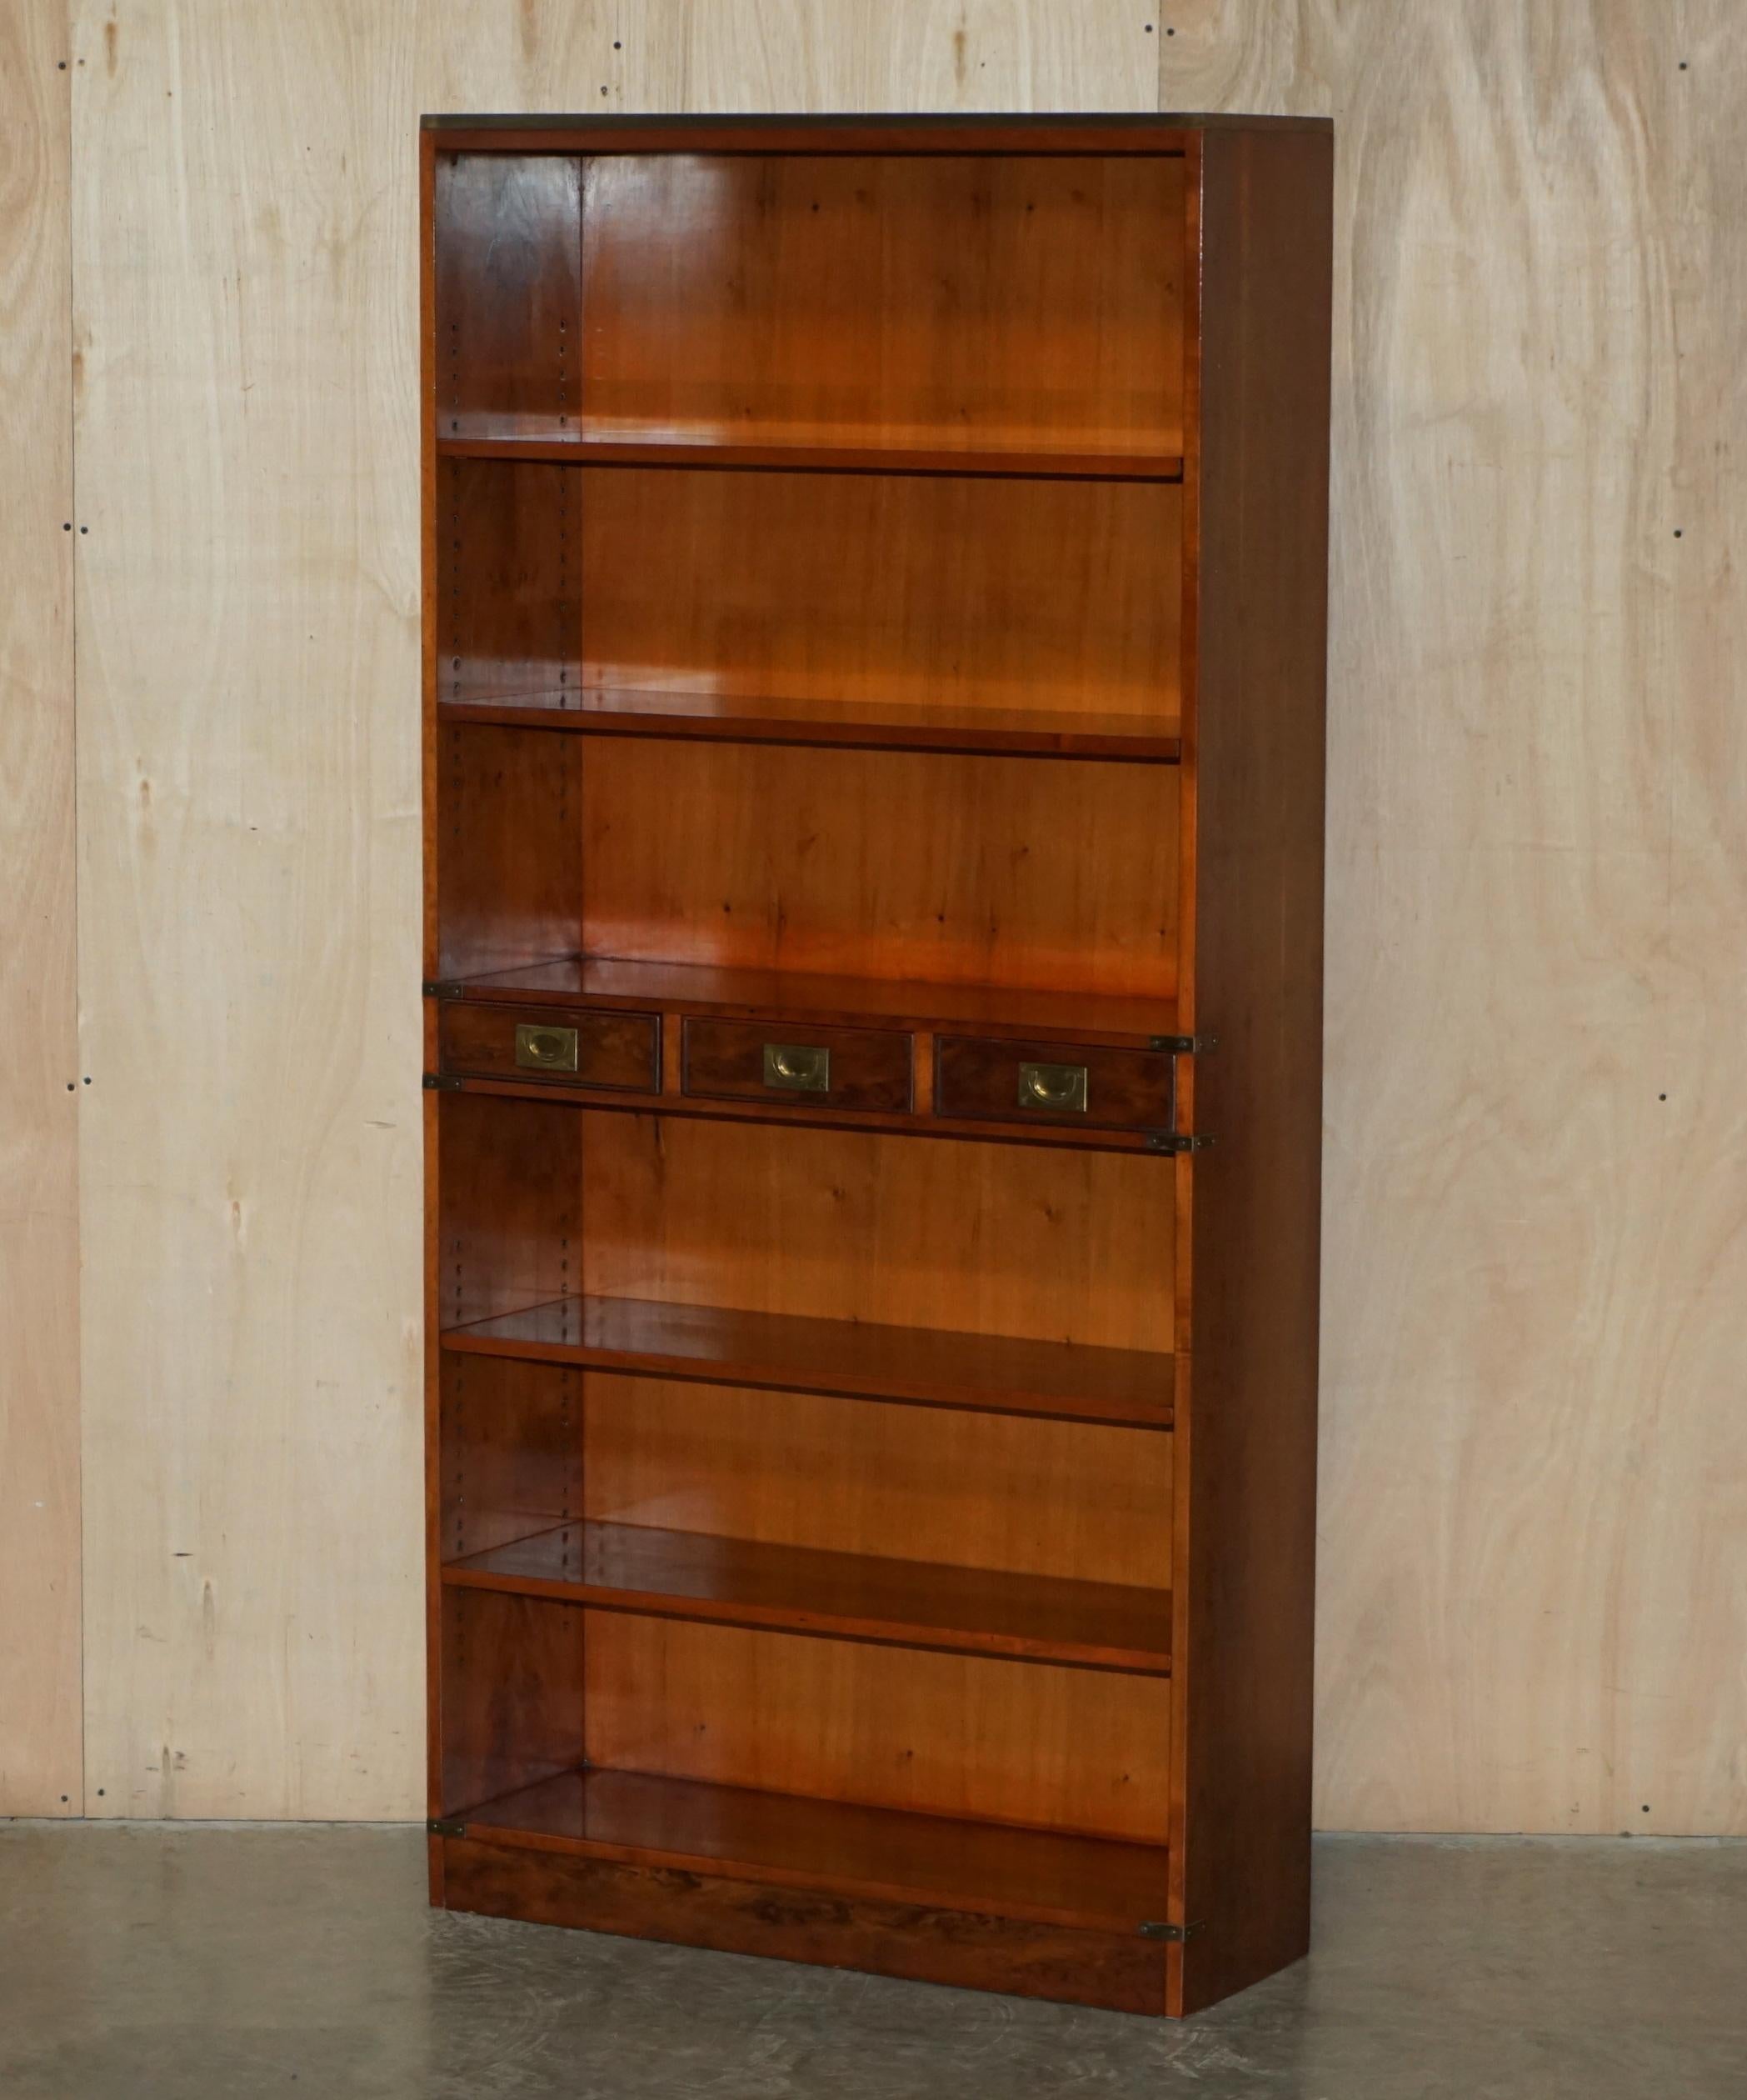 Royal House Antiques

Royal House Antiques is delighted to offer for this lovely pair of vintage Harrods Kennedy Burr Yew wood & Brass Military Campaign three drawer open library bookcases

Please note the delivery fee listed is just a guide, it